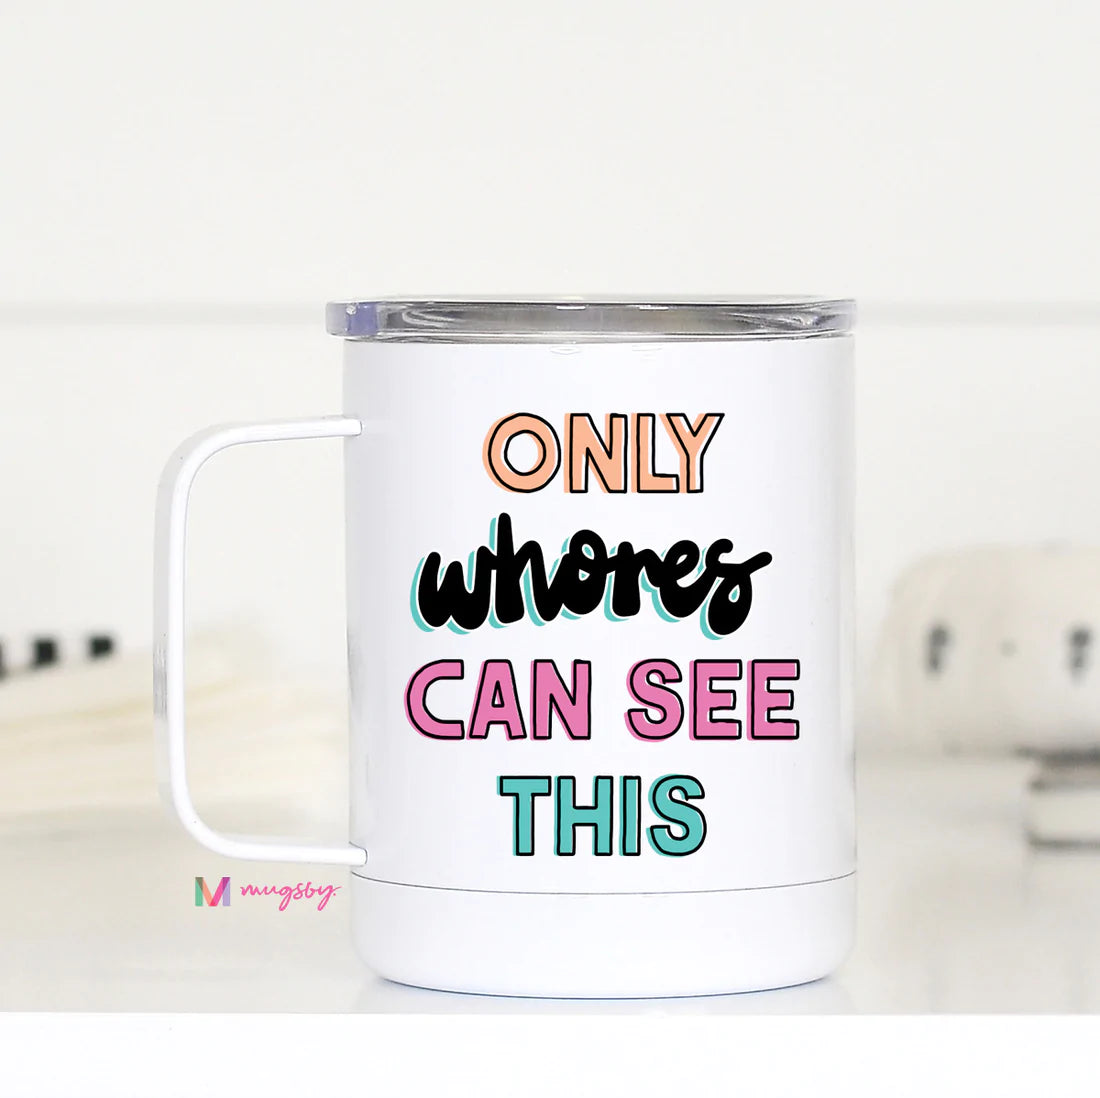 Only Whores Can See this Colorful Travel Cup Mugsby